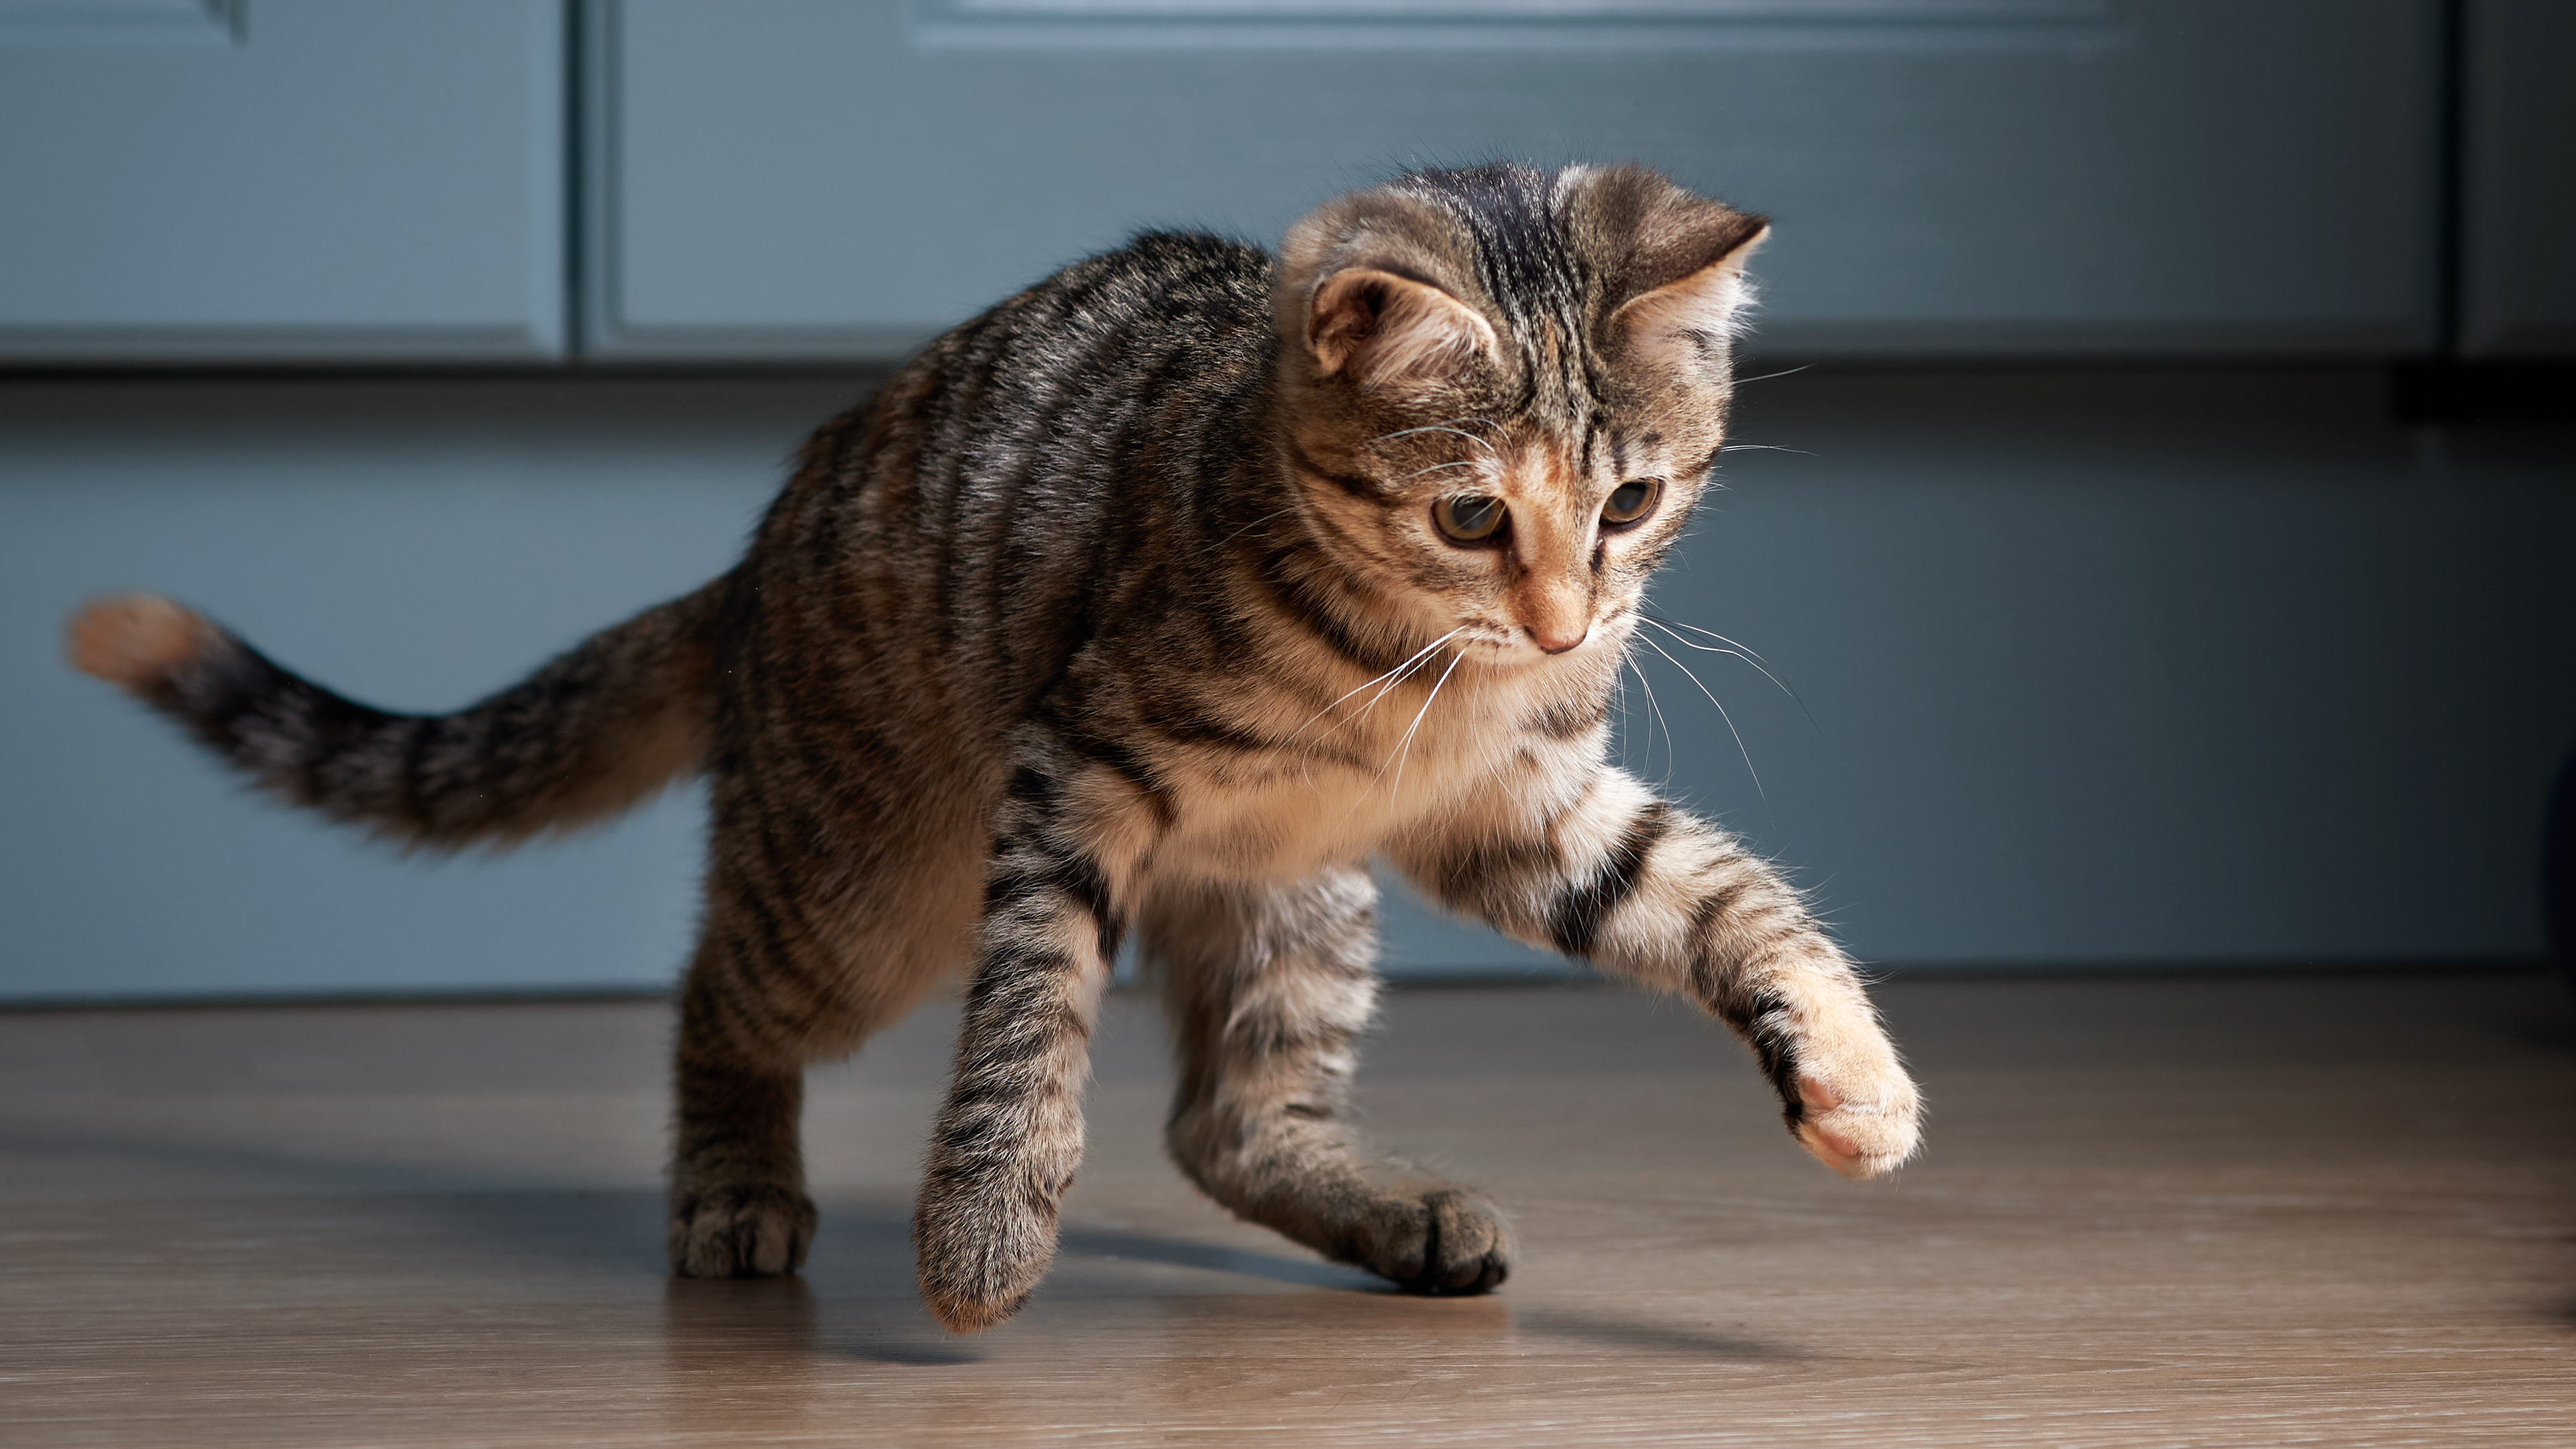 Kitten playing in a kitchen chasing a stick